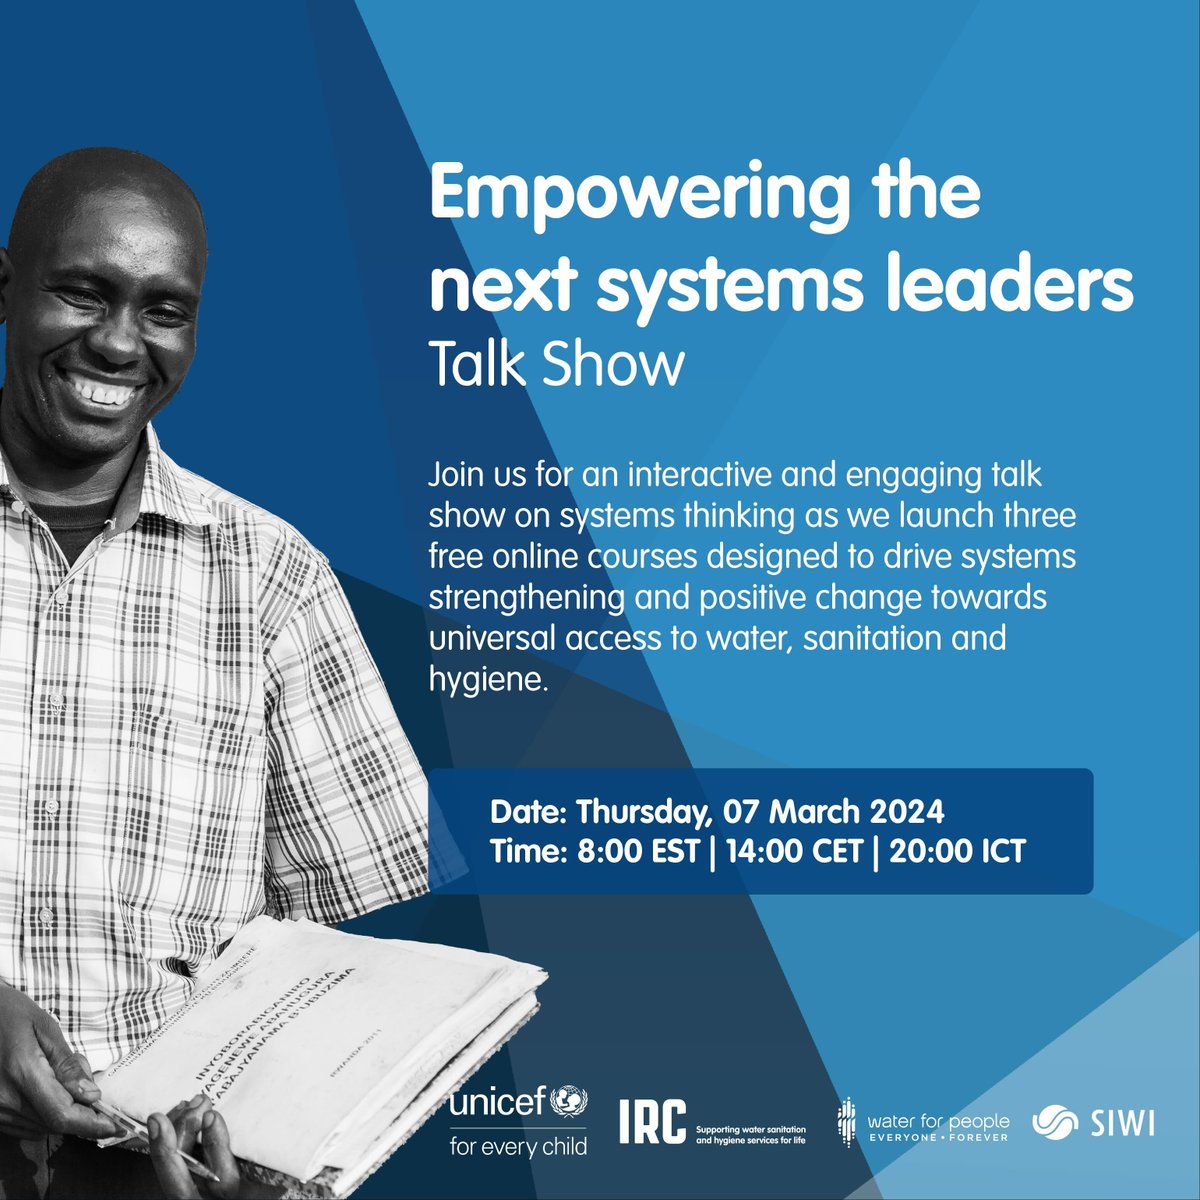 Join us March 7 for a dynamic talk show on empowering the next systems leaders! 🌍 Explore the launch of 3 bilingual online courses soon available on @UNICEF's Agora and #WASHSystemsAcademy. Register now for inspiring discussions and learning ⤵️ bit.ly/SystemsLeaders…